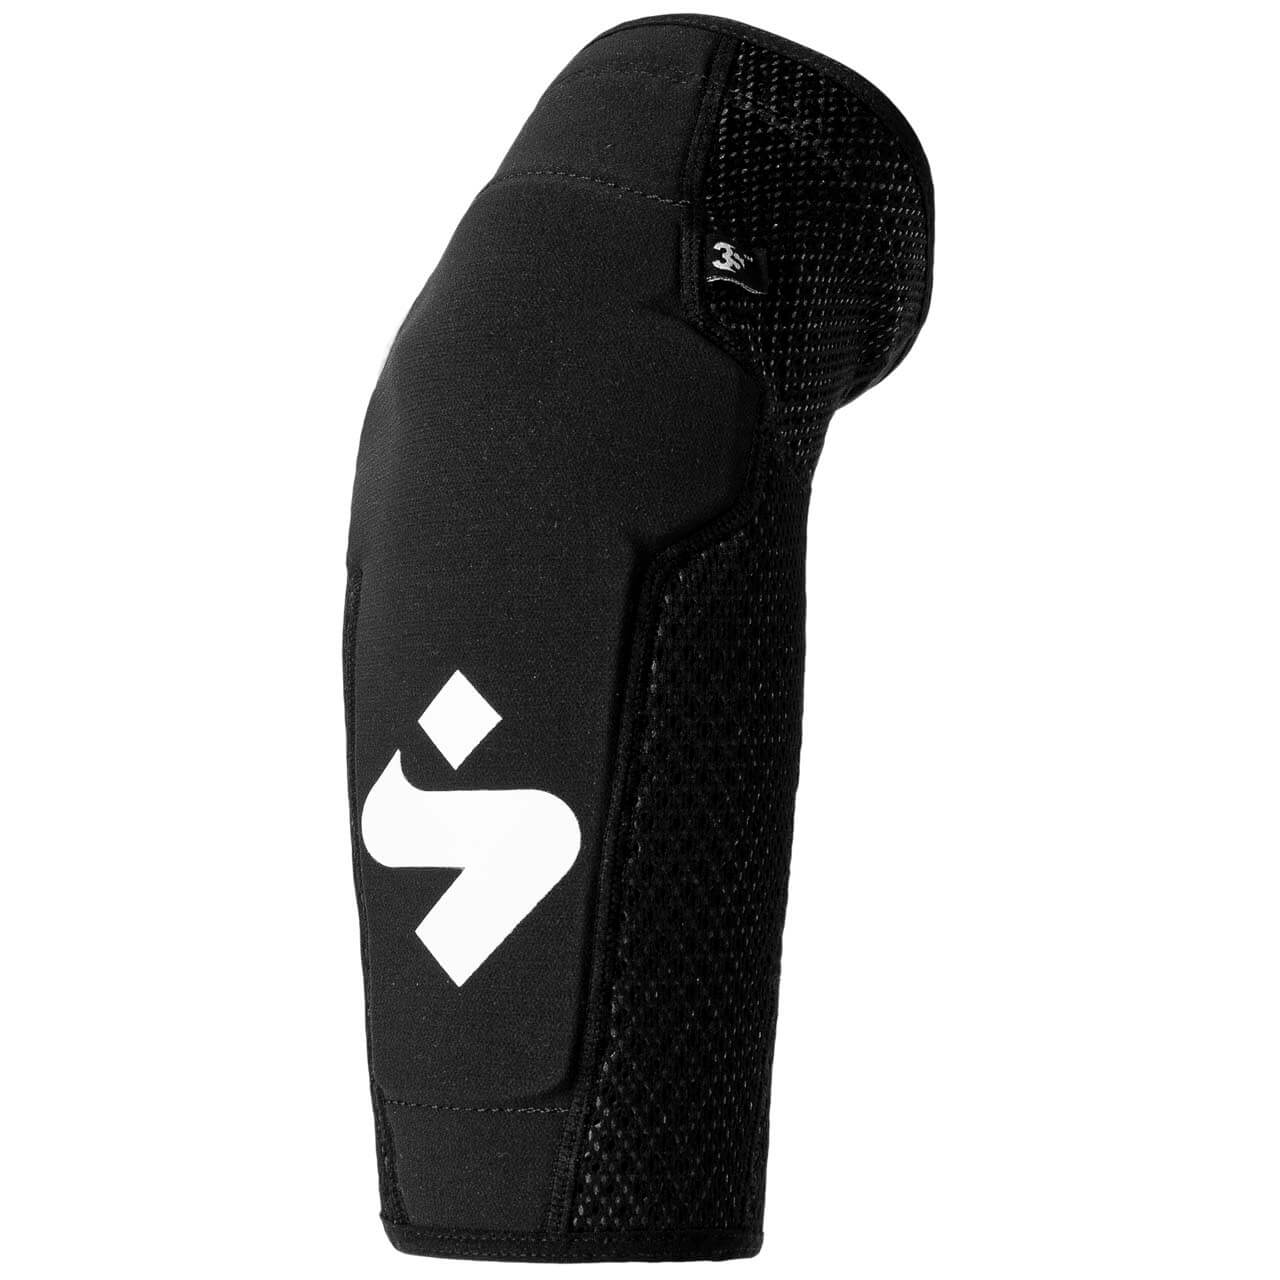 Sweet Protection Knee Guards Light - Black, L von Sweet Protection}